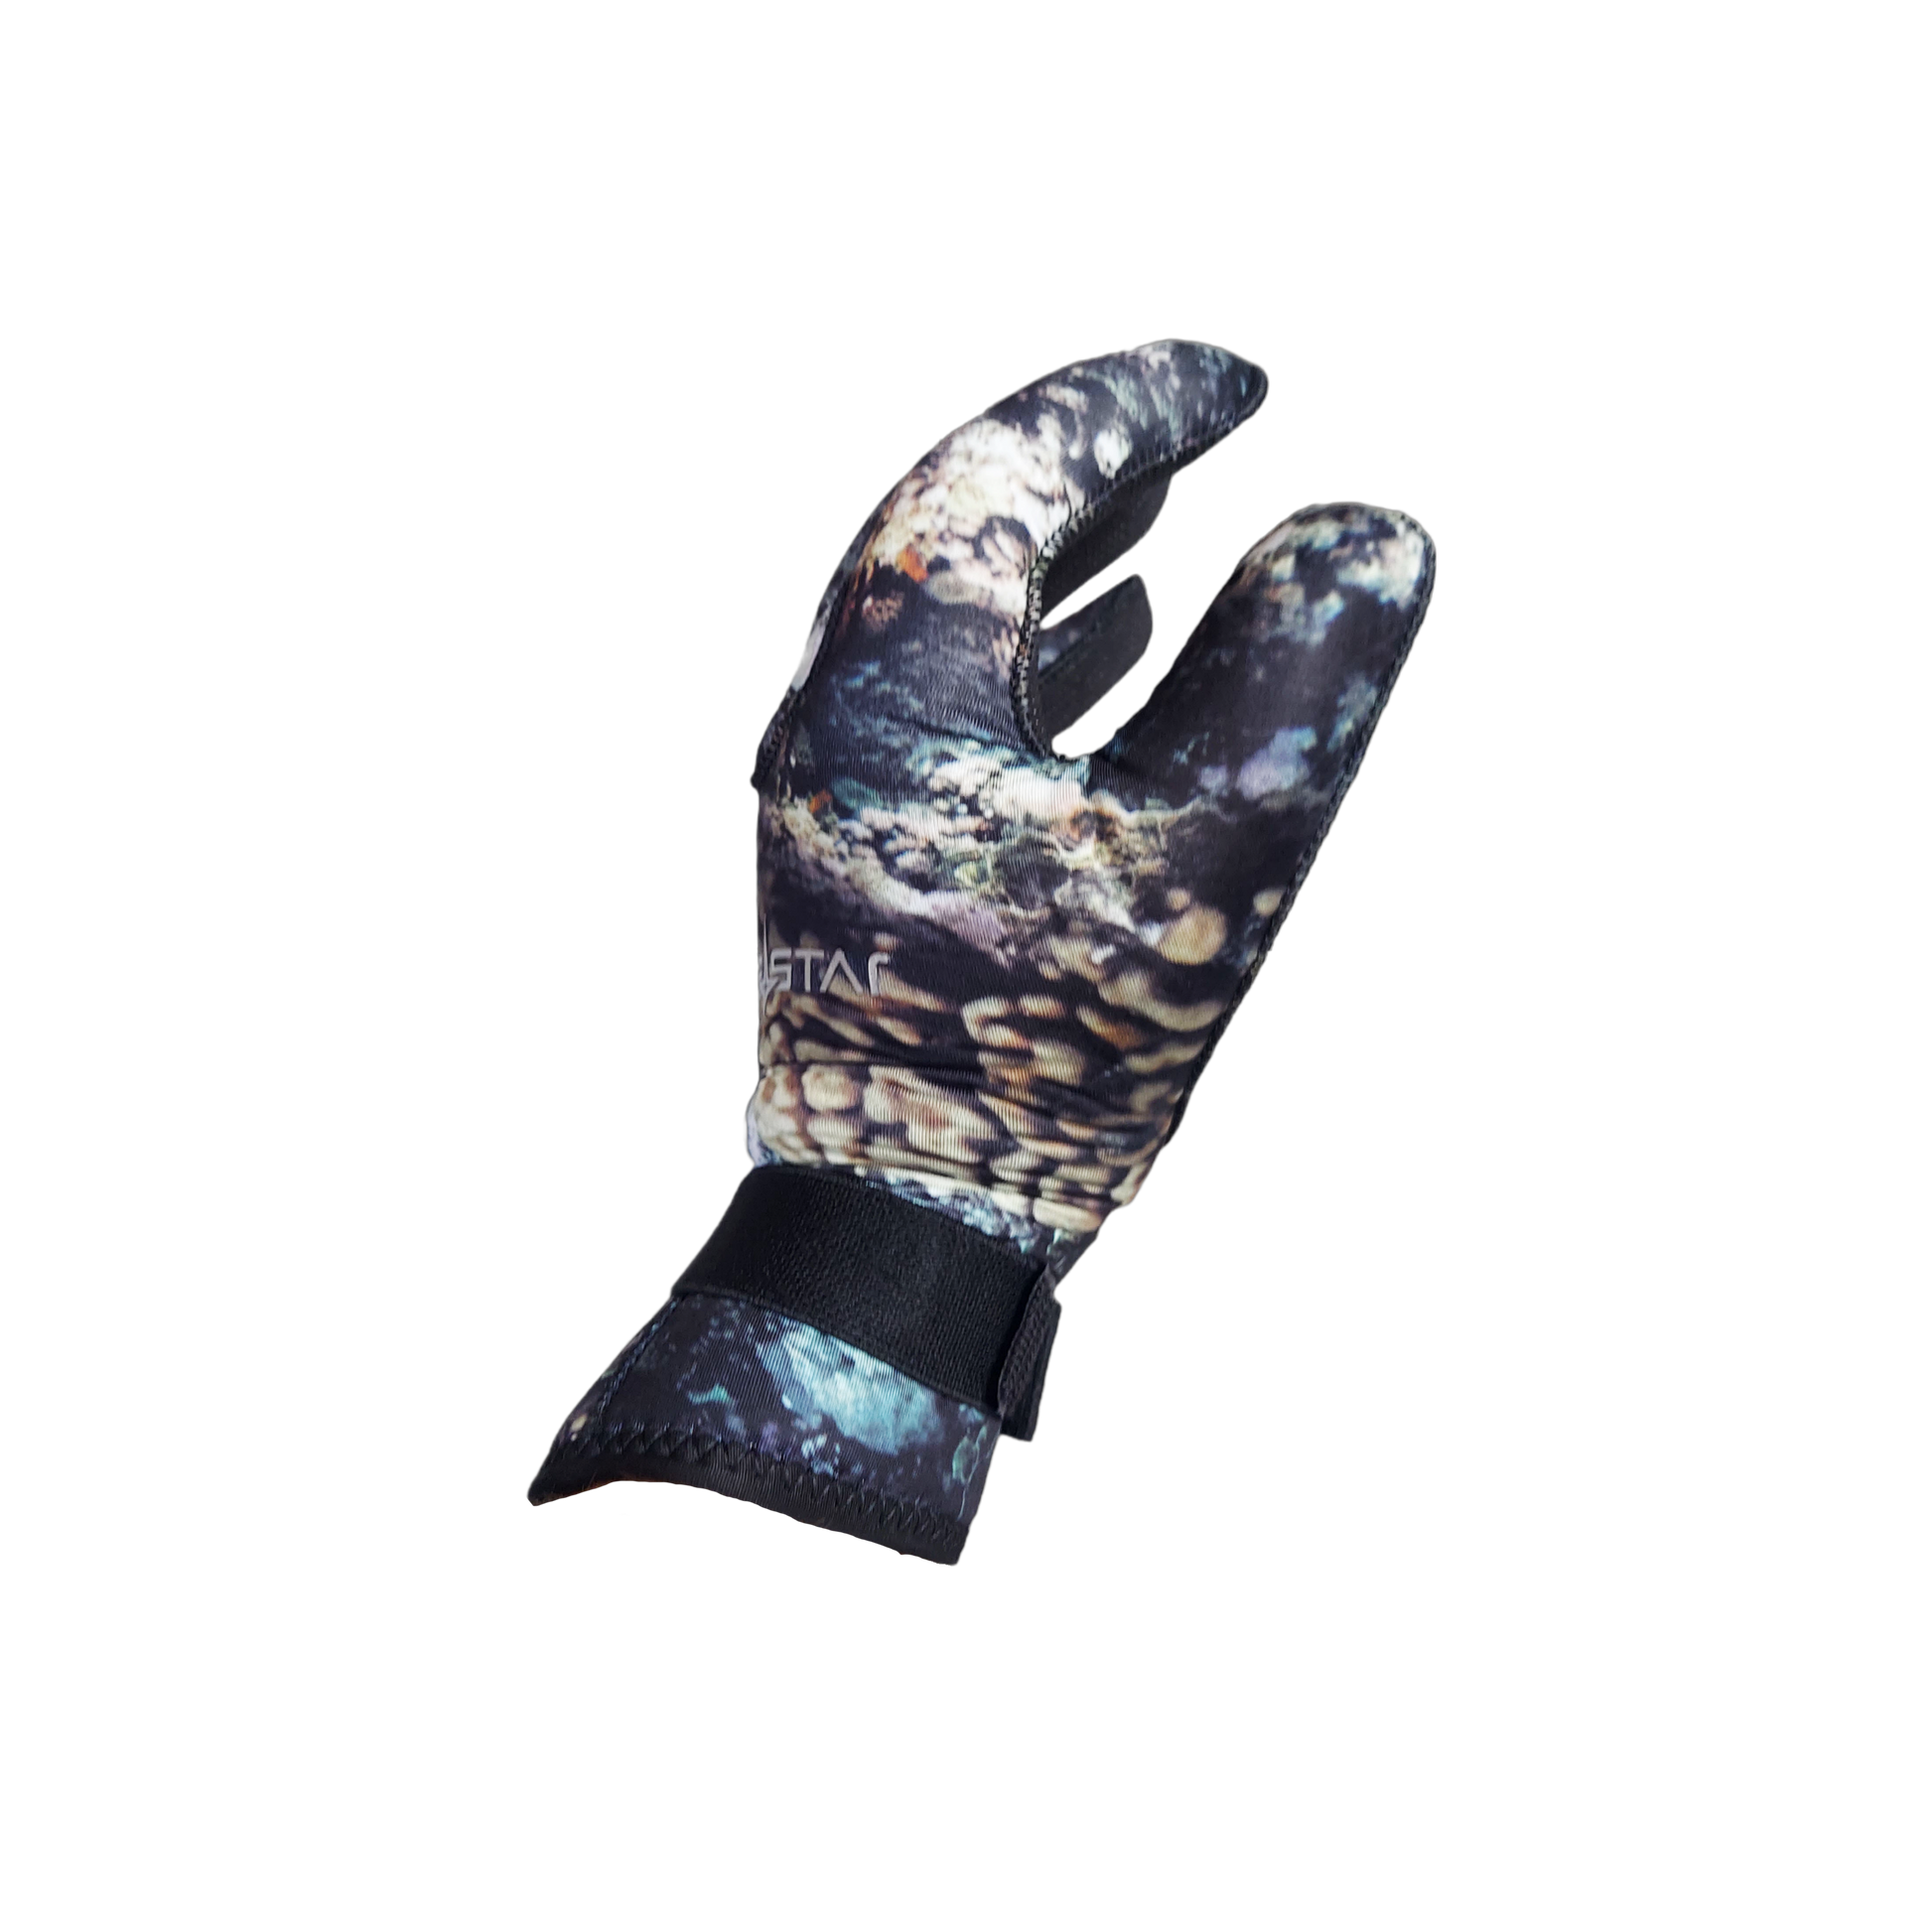 Need help with Gloves for Spearfishing